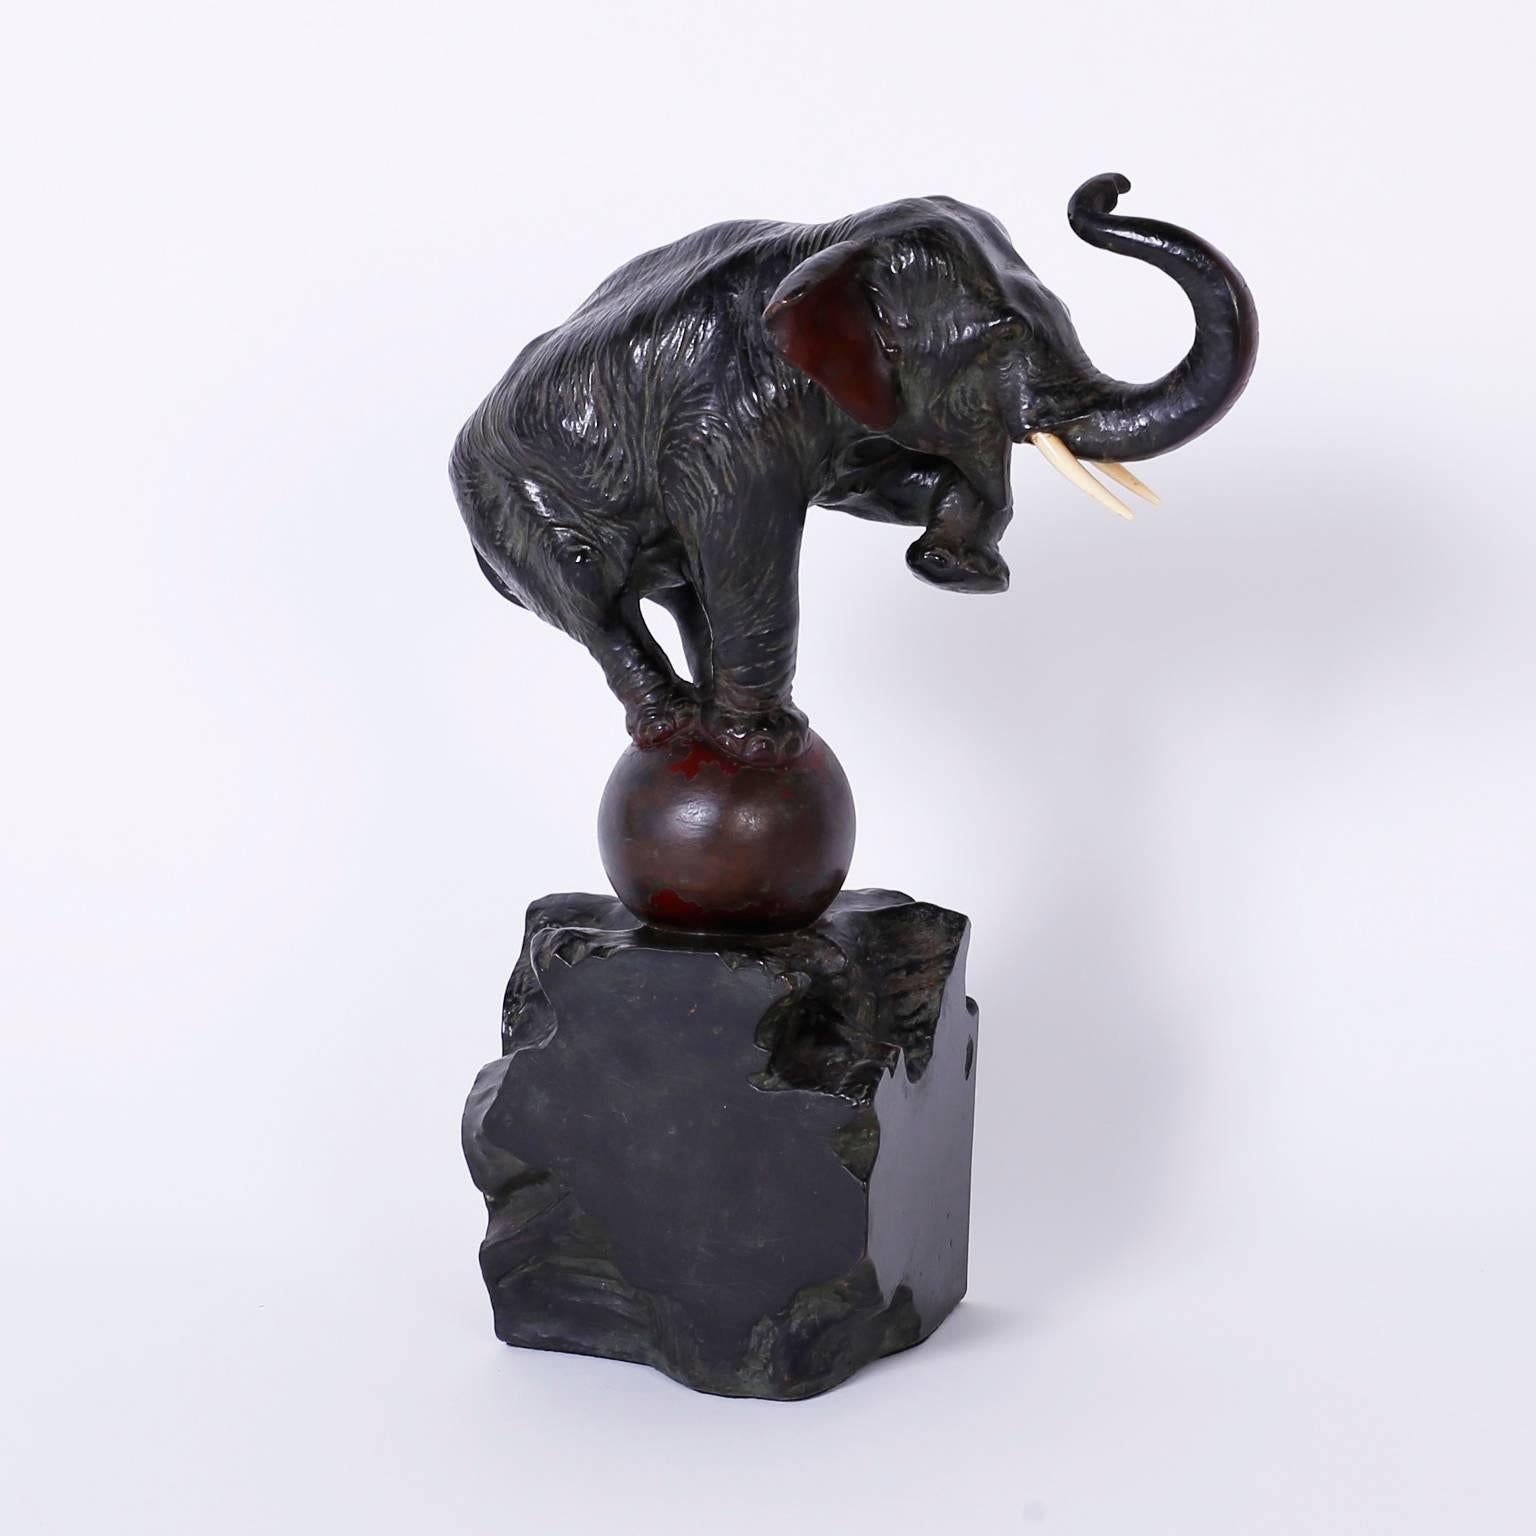 Art deco bronze elephant sculpture or object of art retaining its original patina, depicting the familiar circus pose of balancing on a ball. Presented on an abstract bronze stone base.